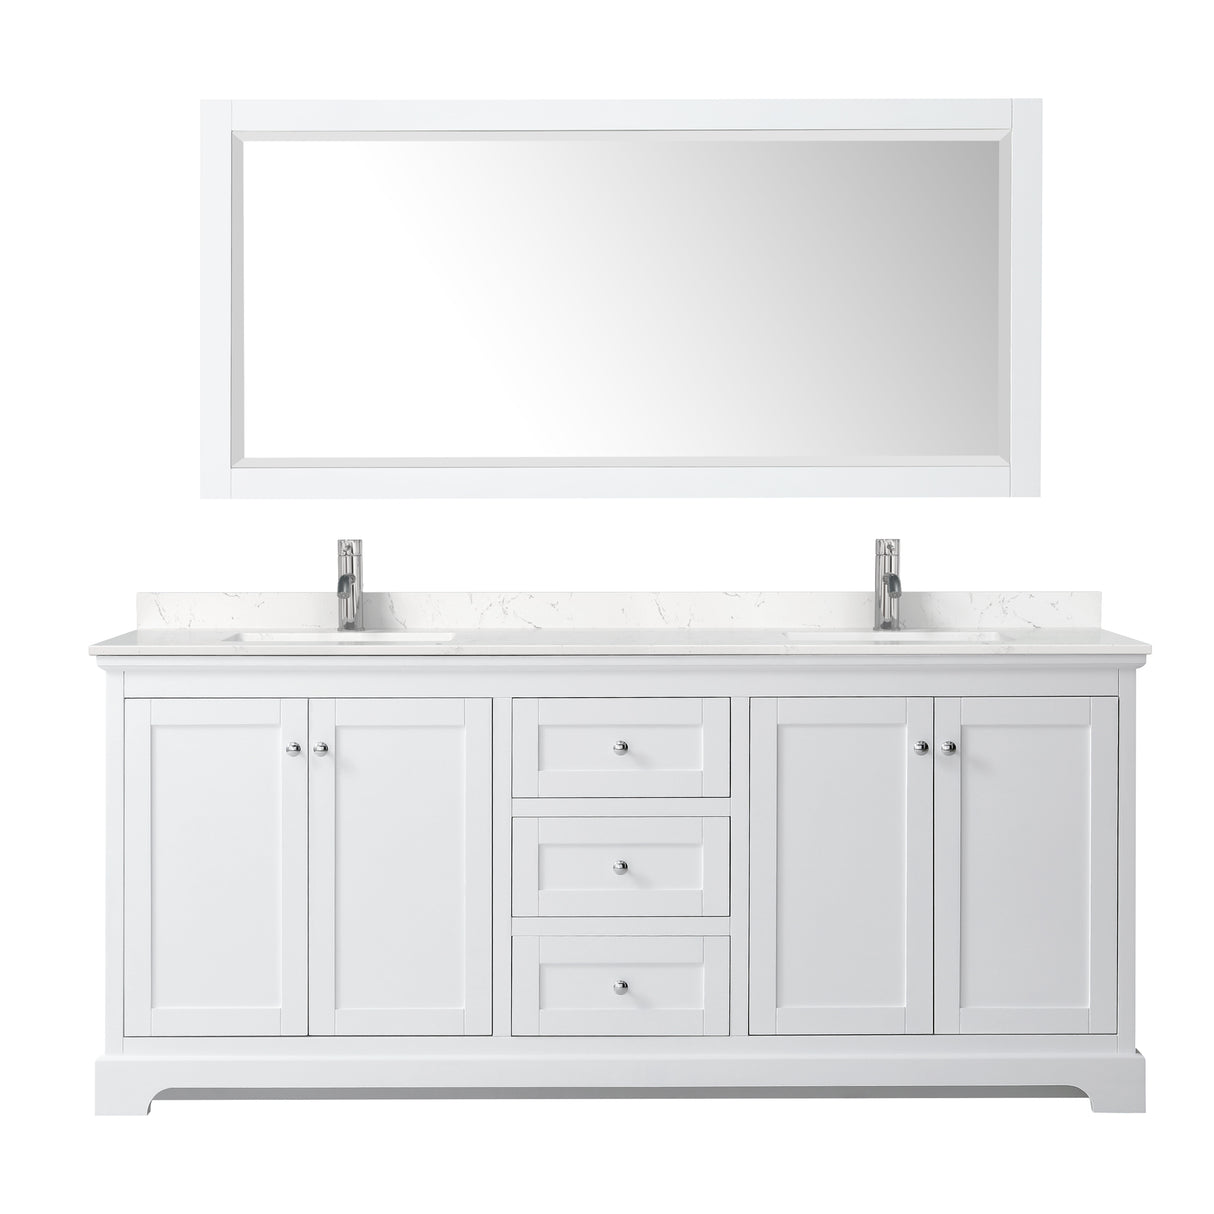 Avery 80 Inch Double Bathroom Vanity in White Carrara Cultured Marble Countertop Undermount Square Sinks No Mirror